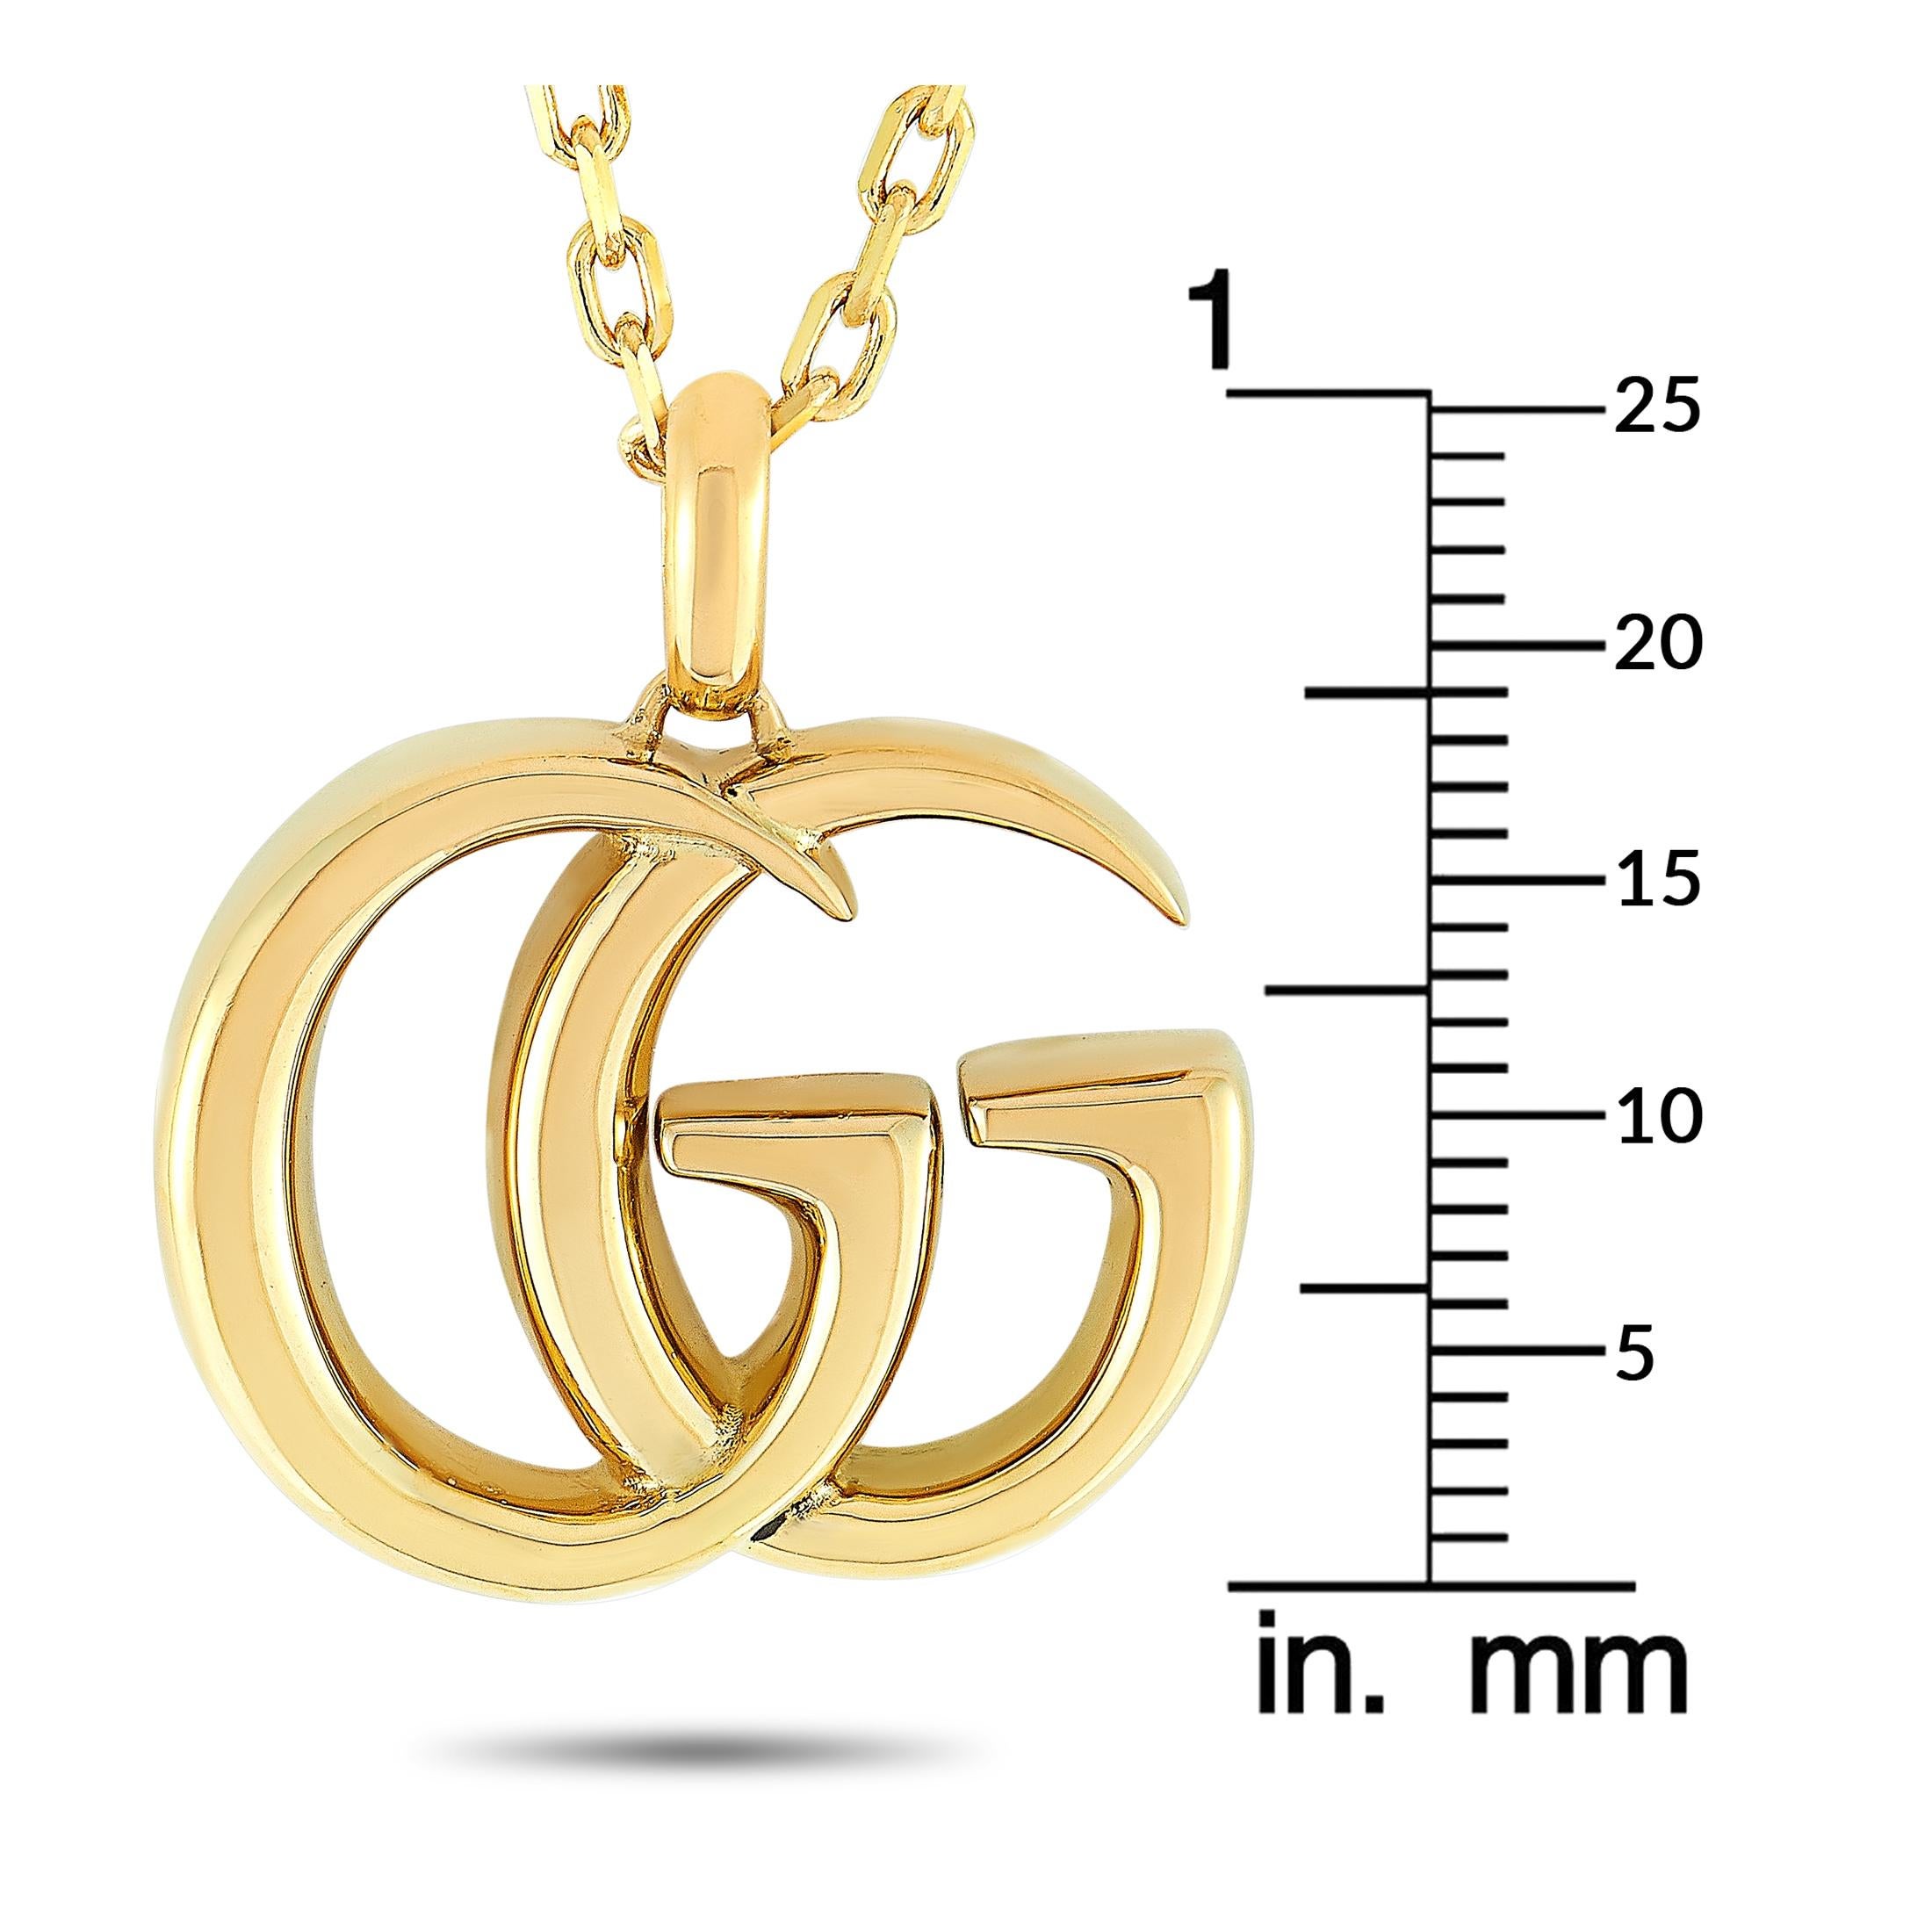 gg necklace